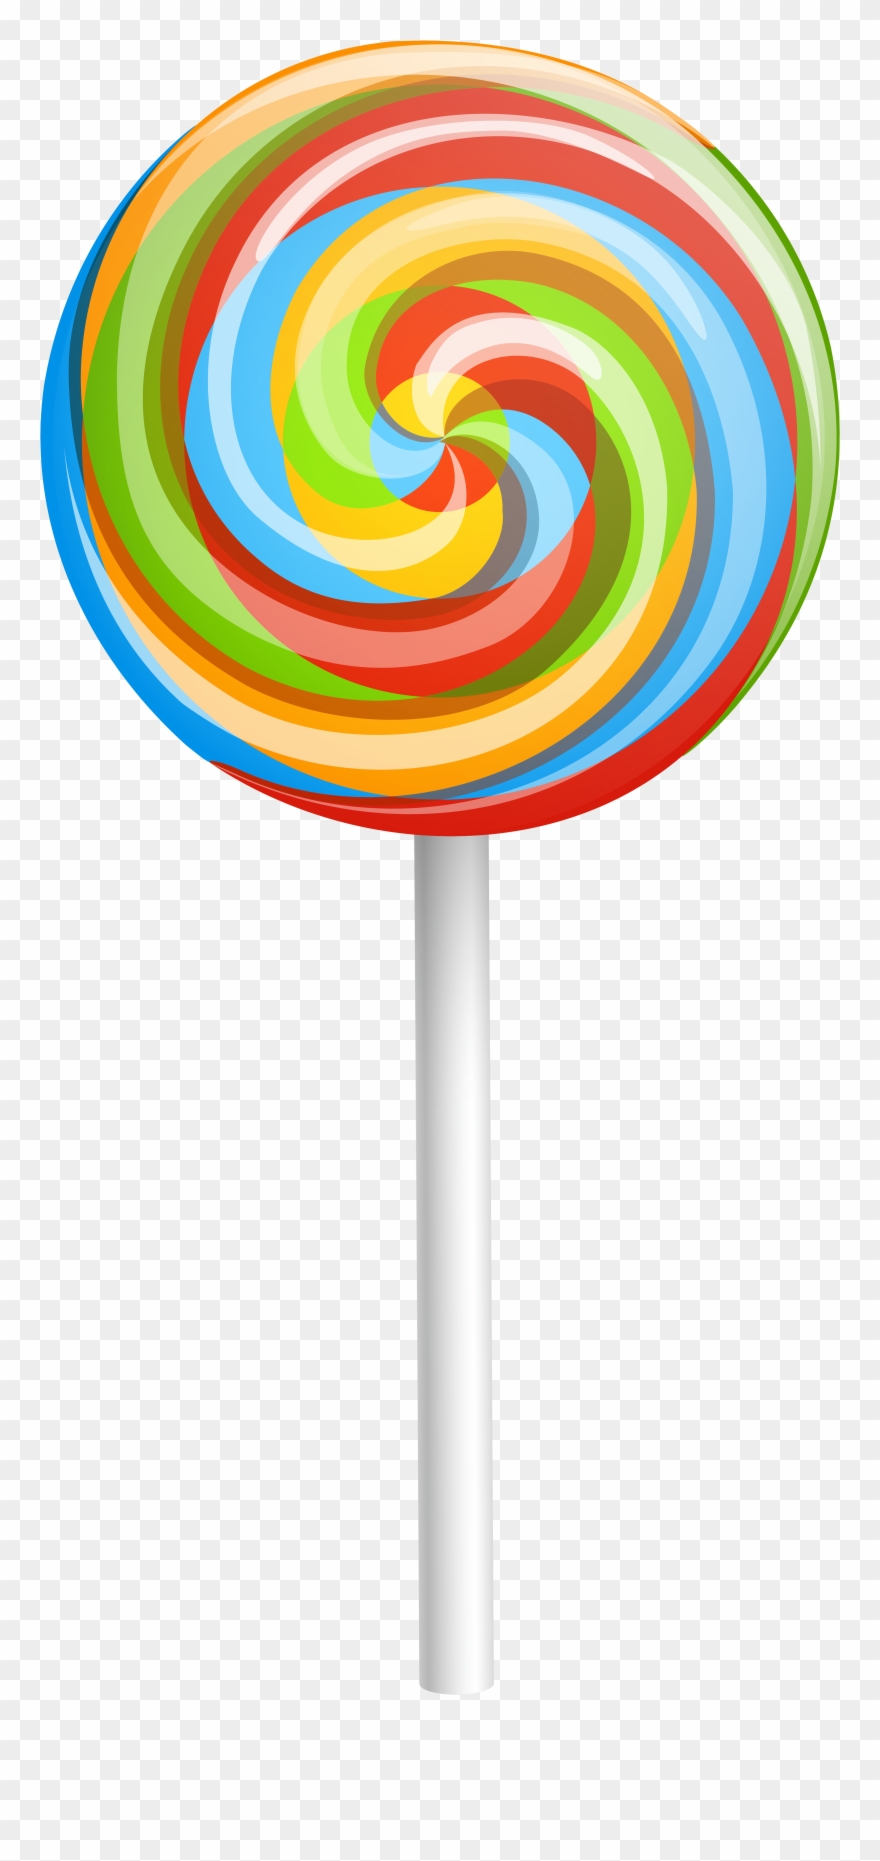 Lollipop clipart many candy. Food candies png pinclipart